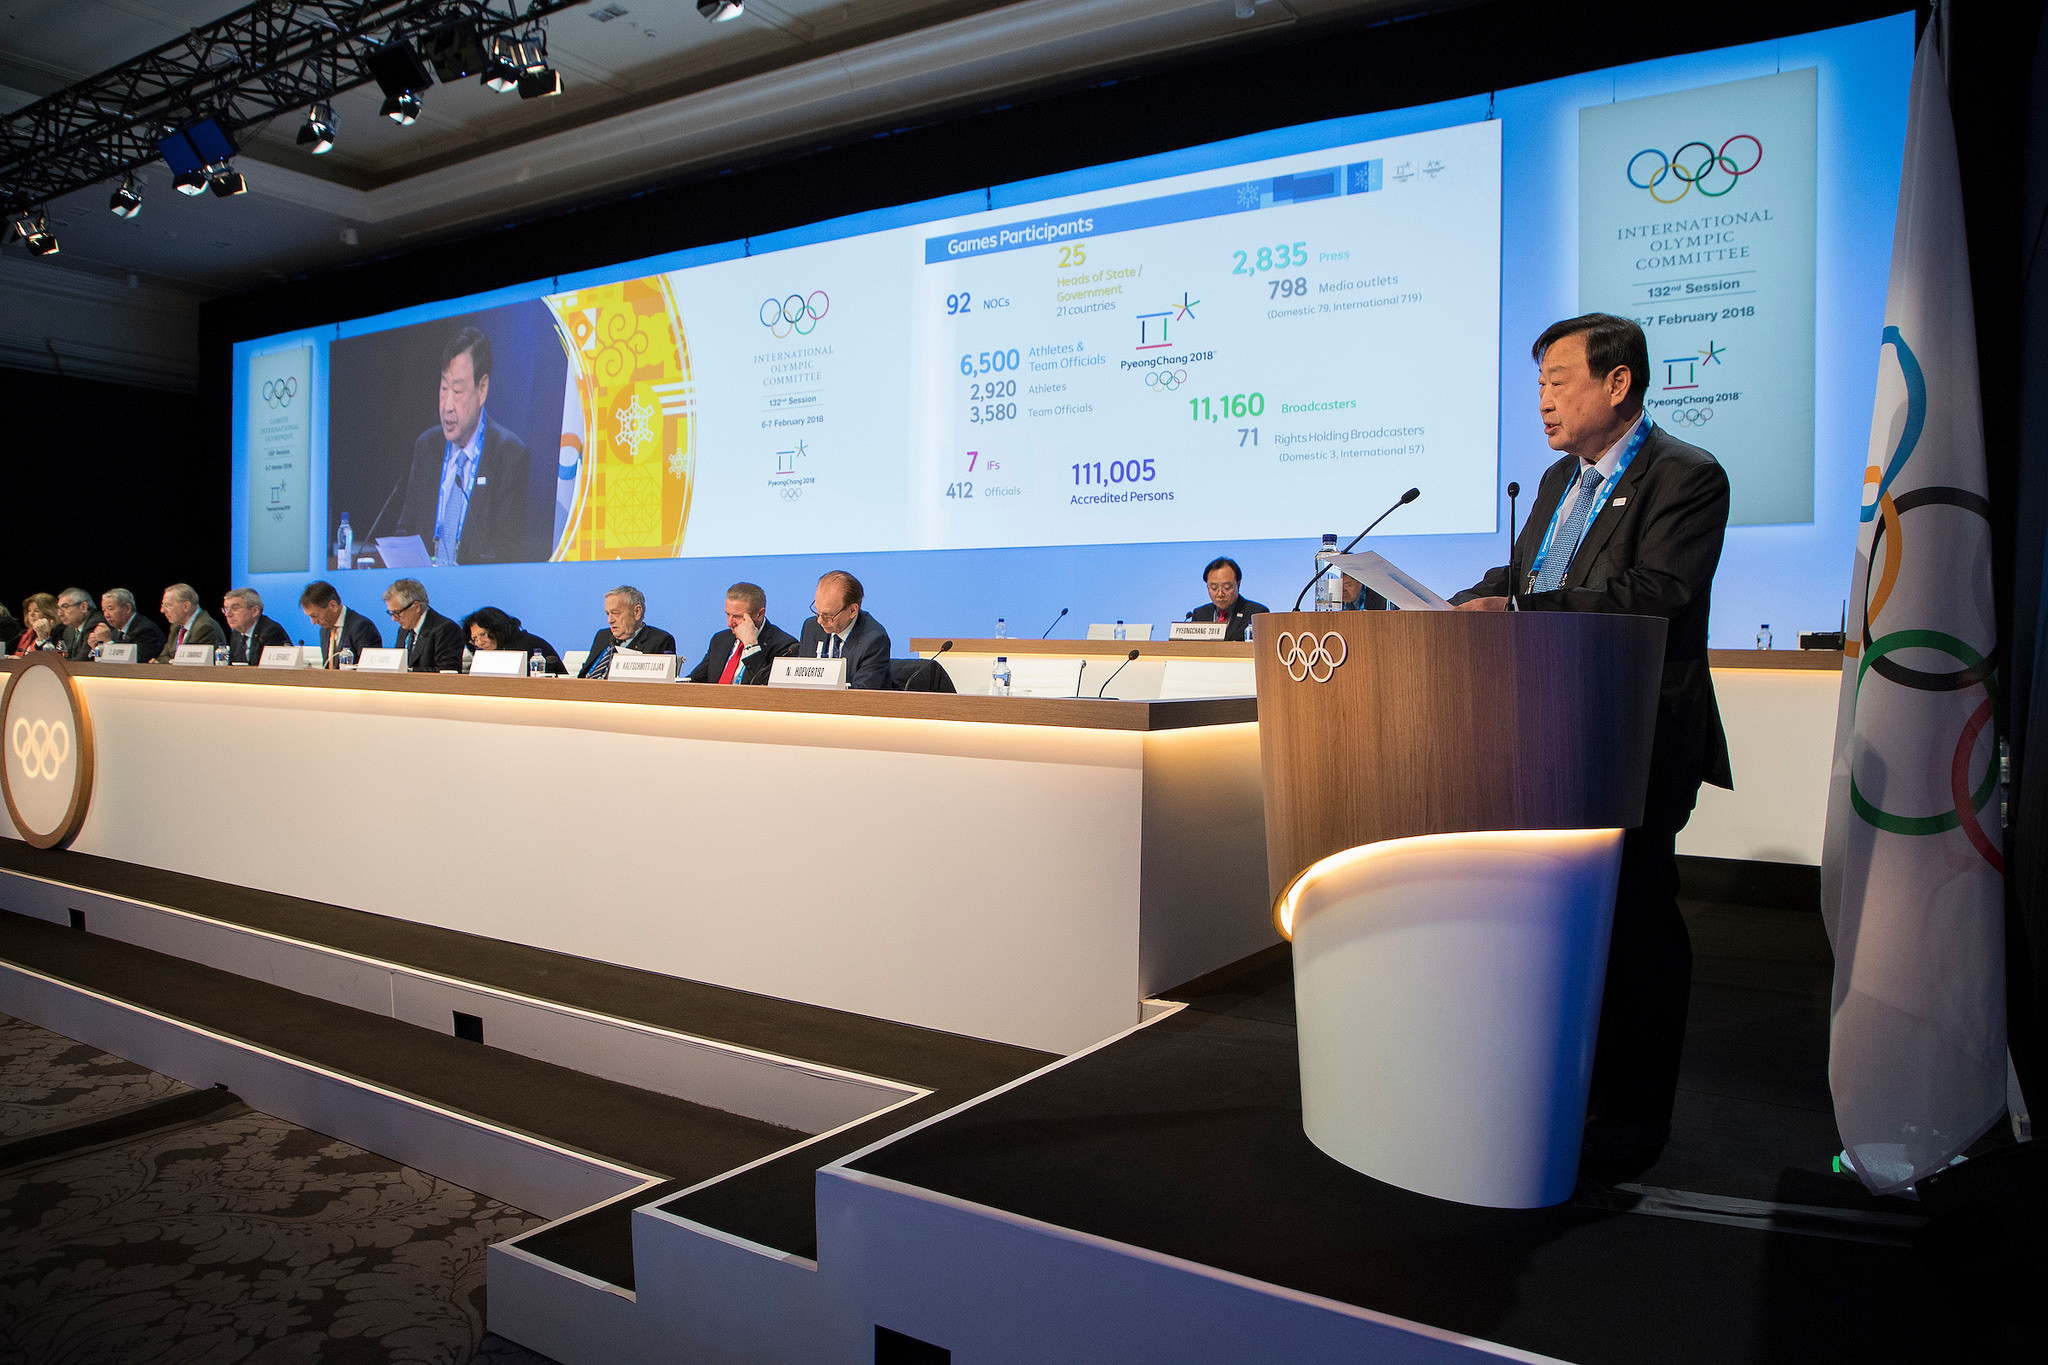 Pyeongchang 2018 President Lee Hee-beom pictured presenting during the IOC Session ©IOC/Flickr